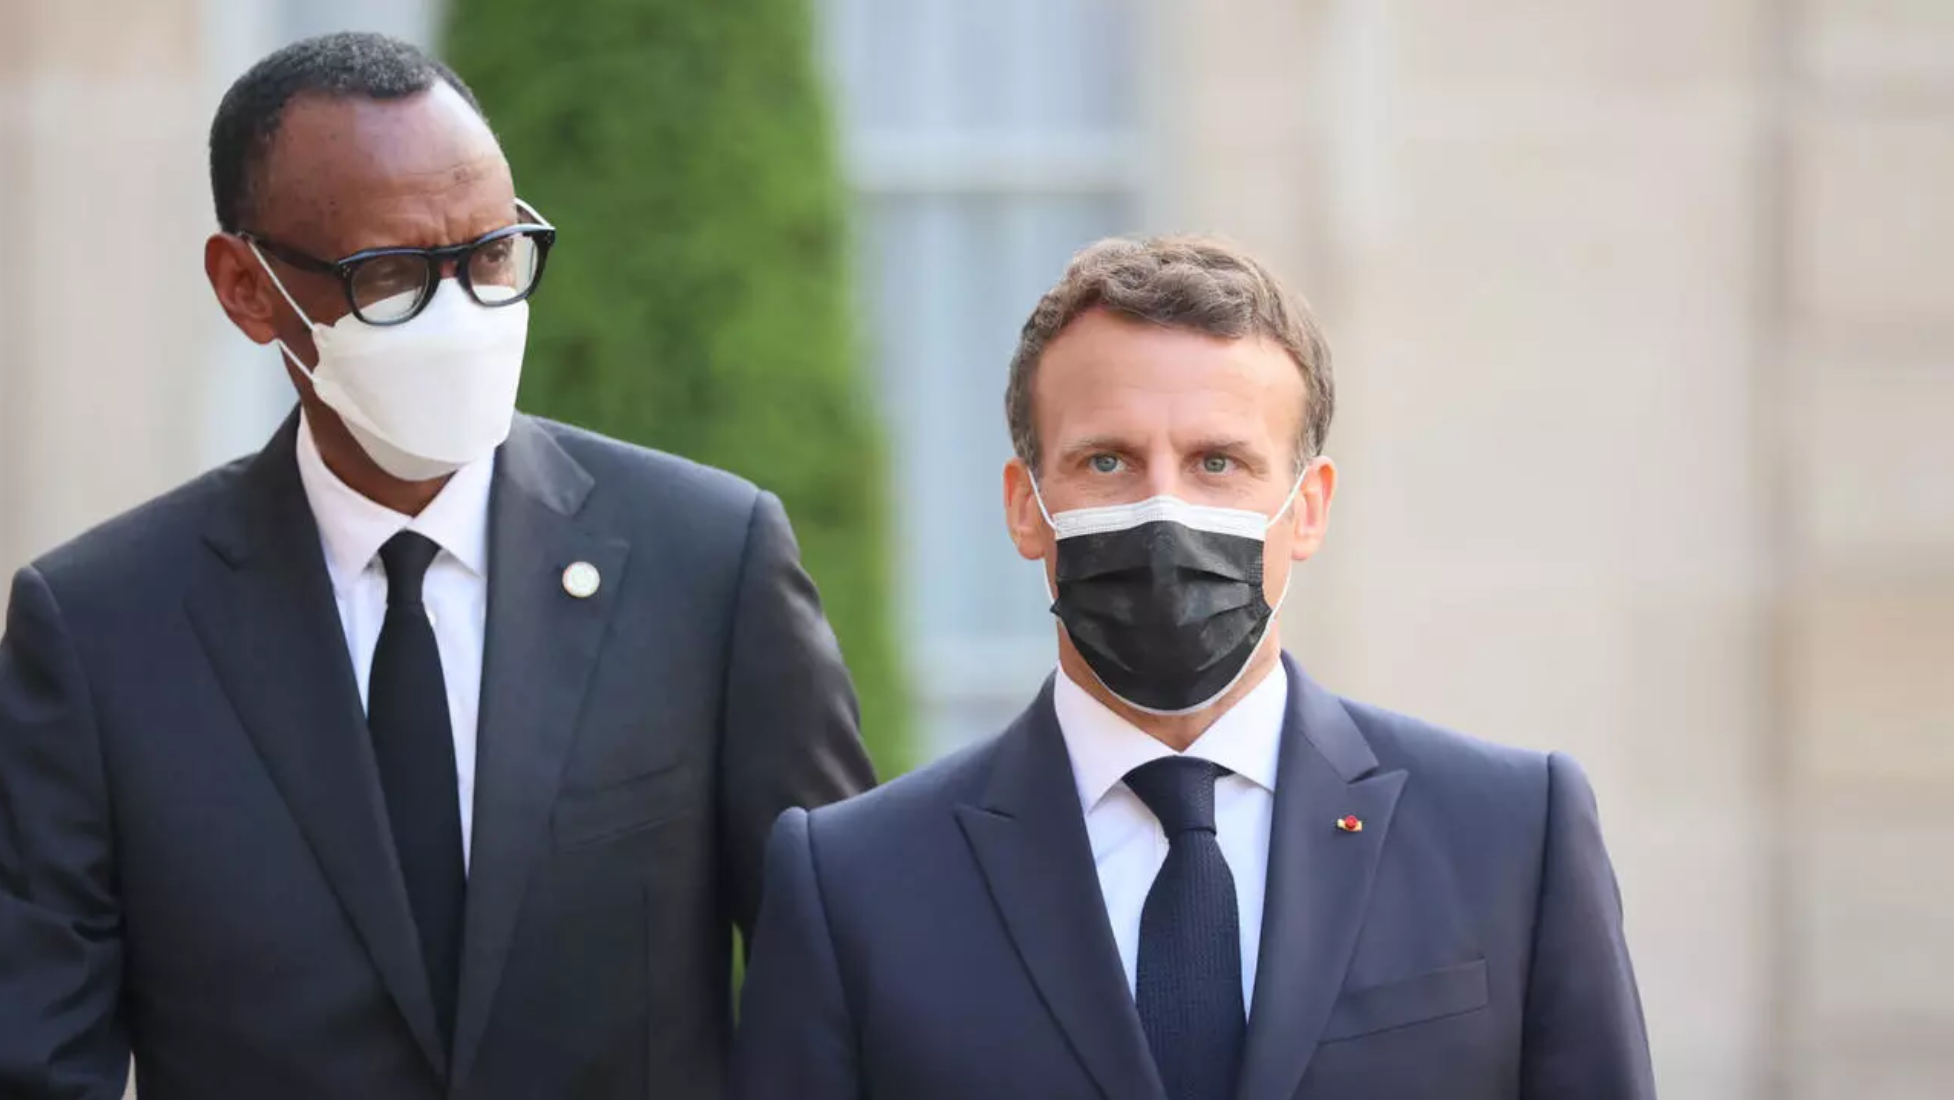 President Macron and President Kagame in Elysée Palace on 17 May 2021